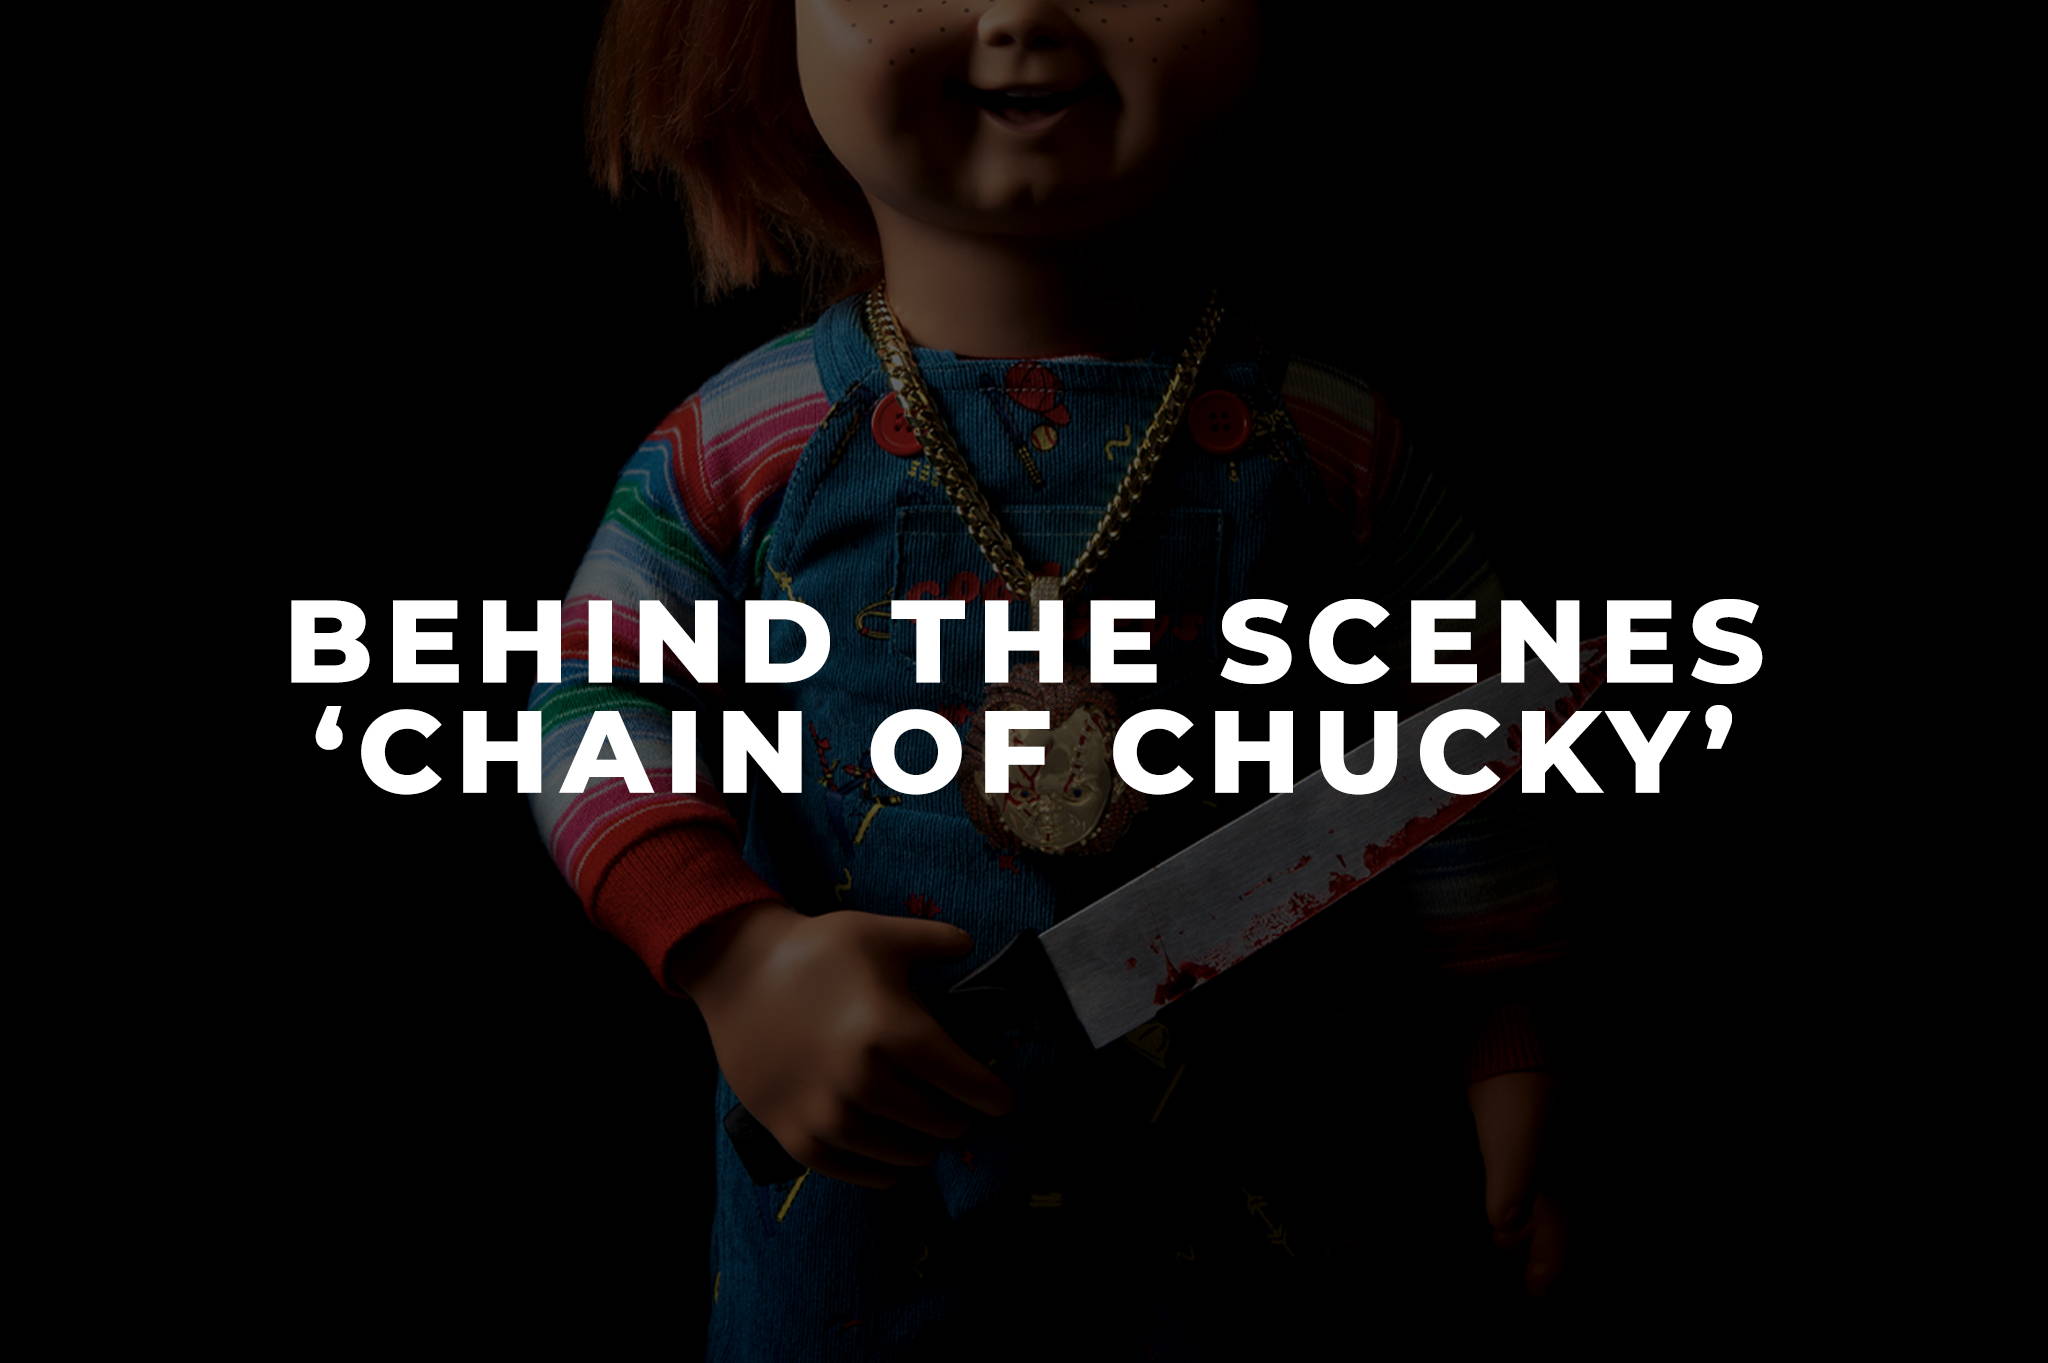 behind-the-scenes-chain-of-chucky